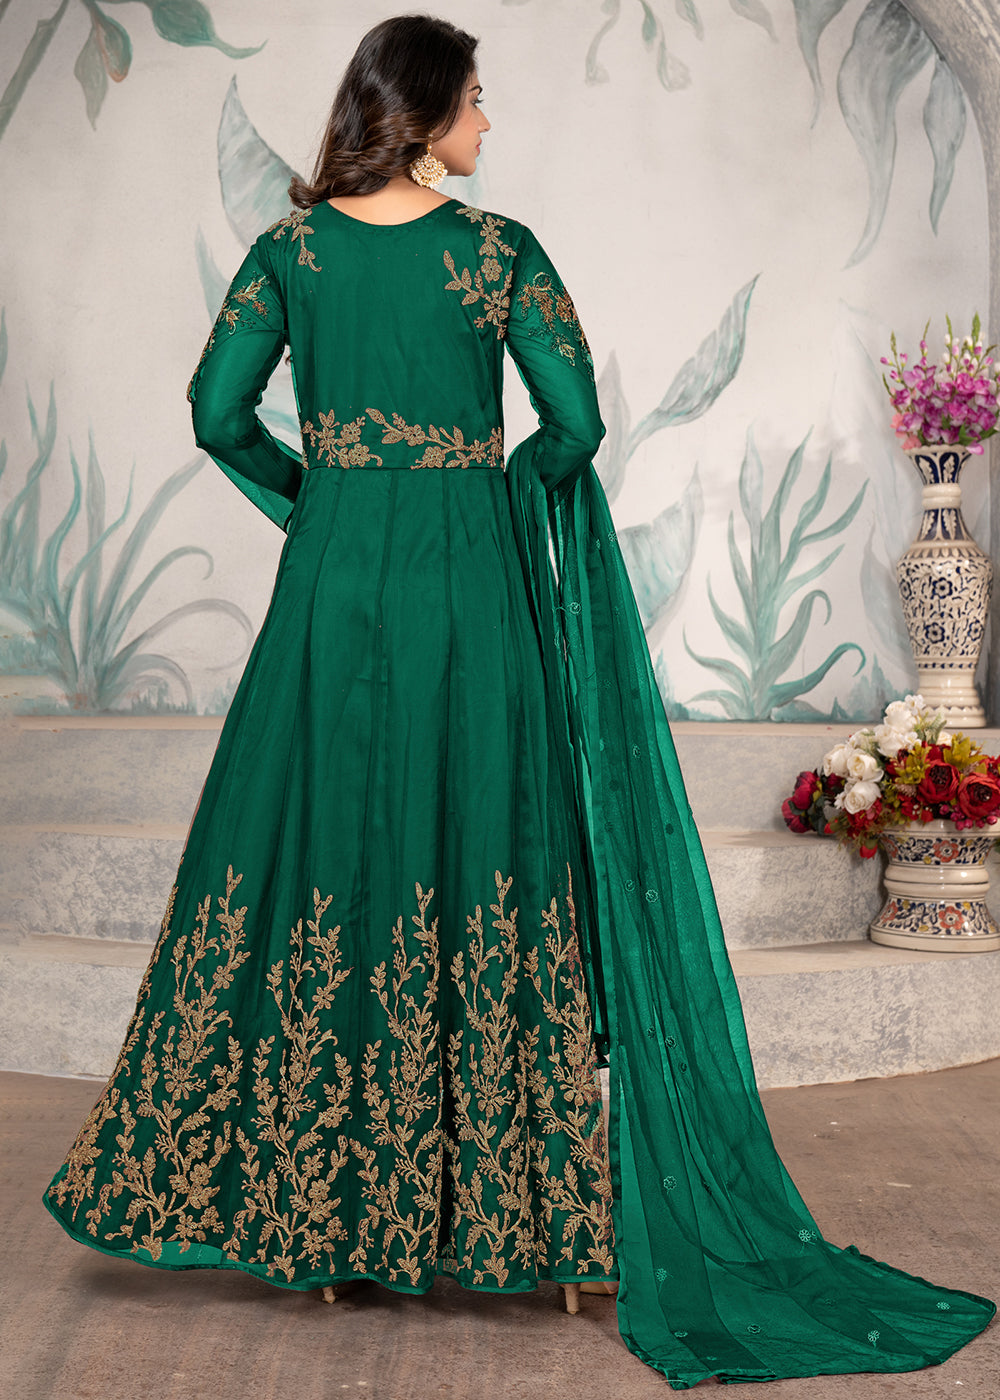 Buy Now Party Style Green Floral Zari Thread Embroidered Anarkali Suit Online in USA, UK, Australia, New Zealand, Canada, Italy & Worldwide at Empress Clothing. 